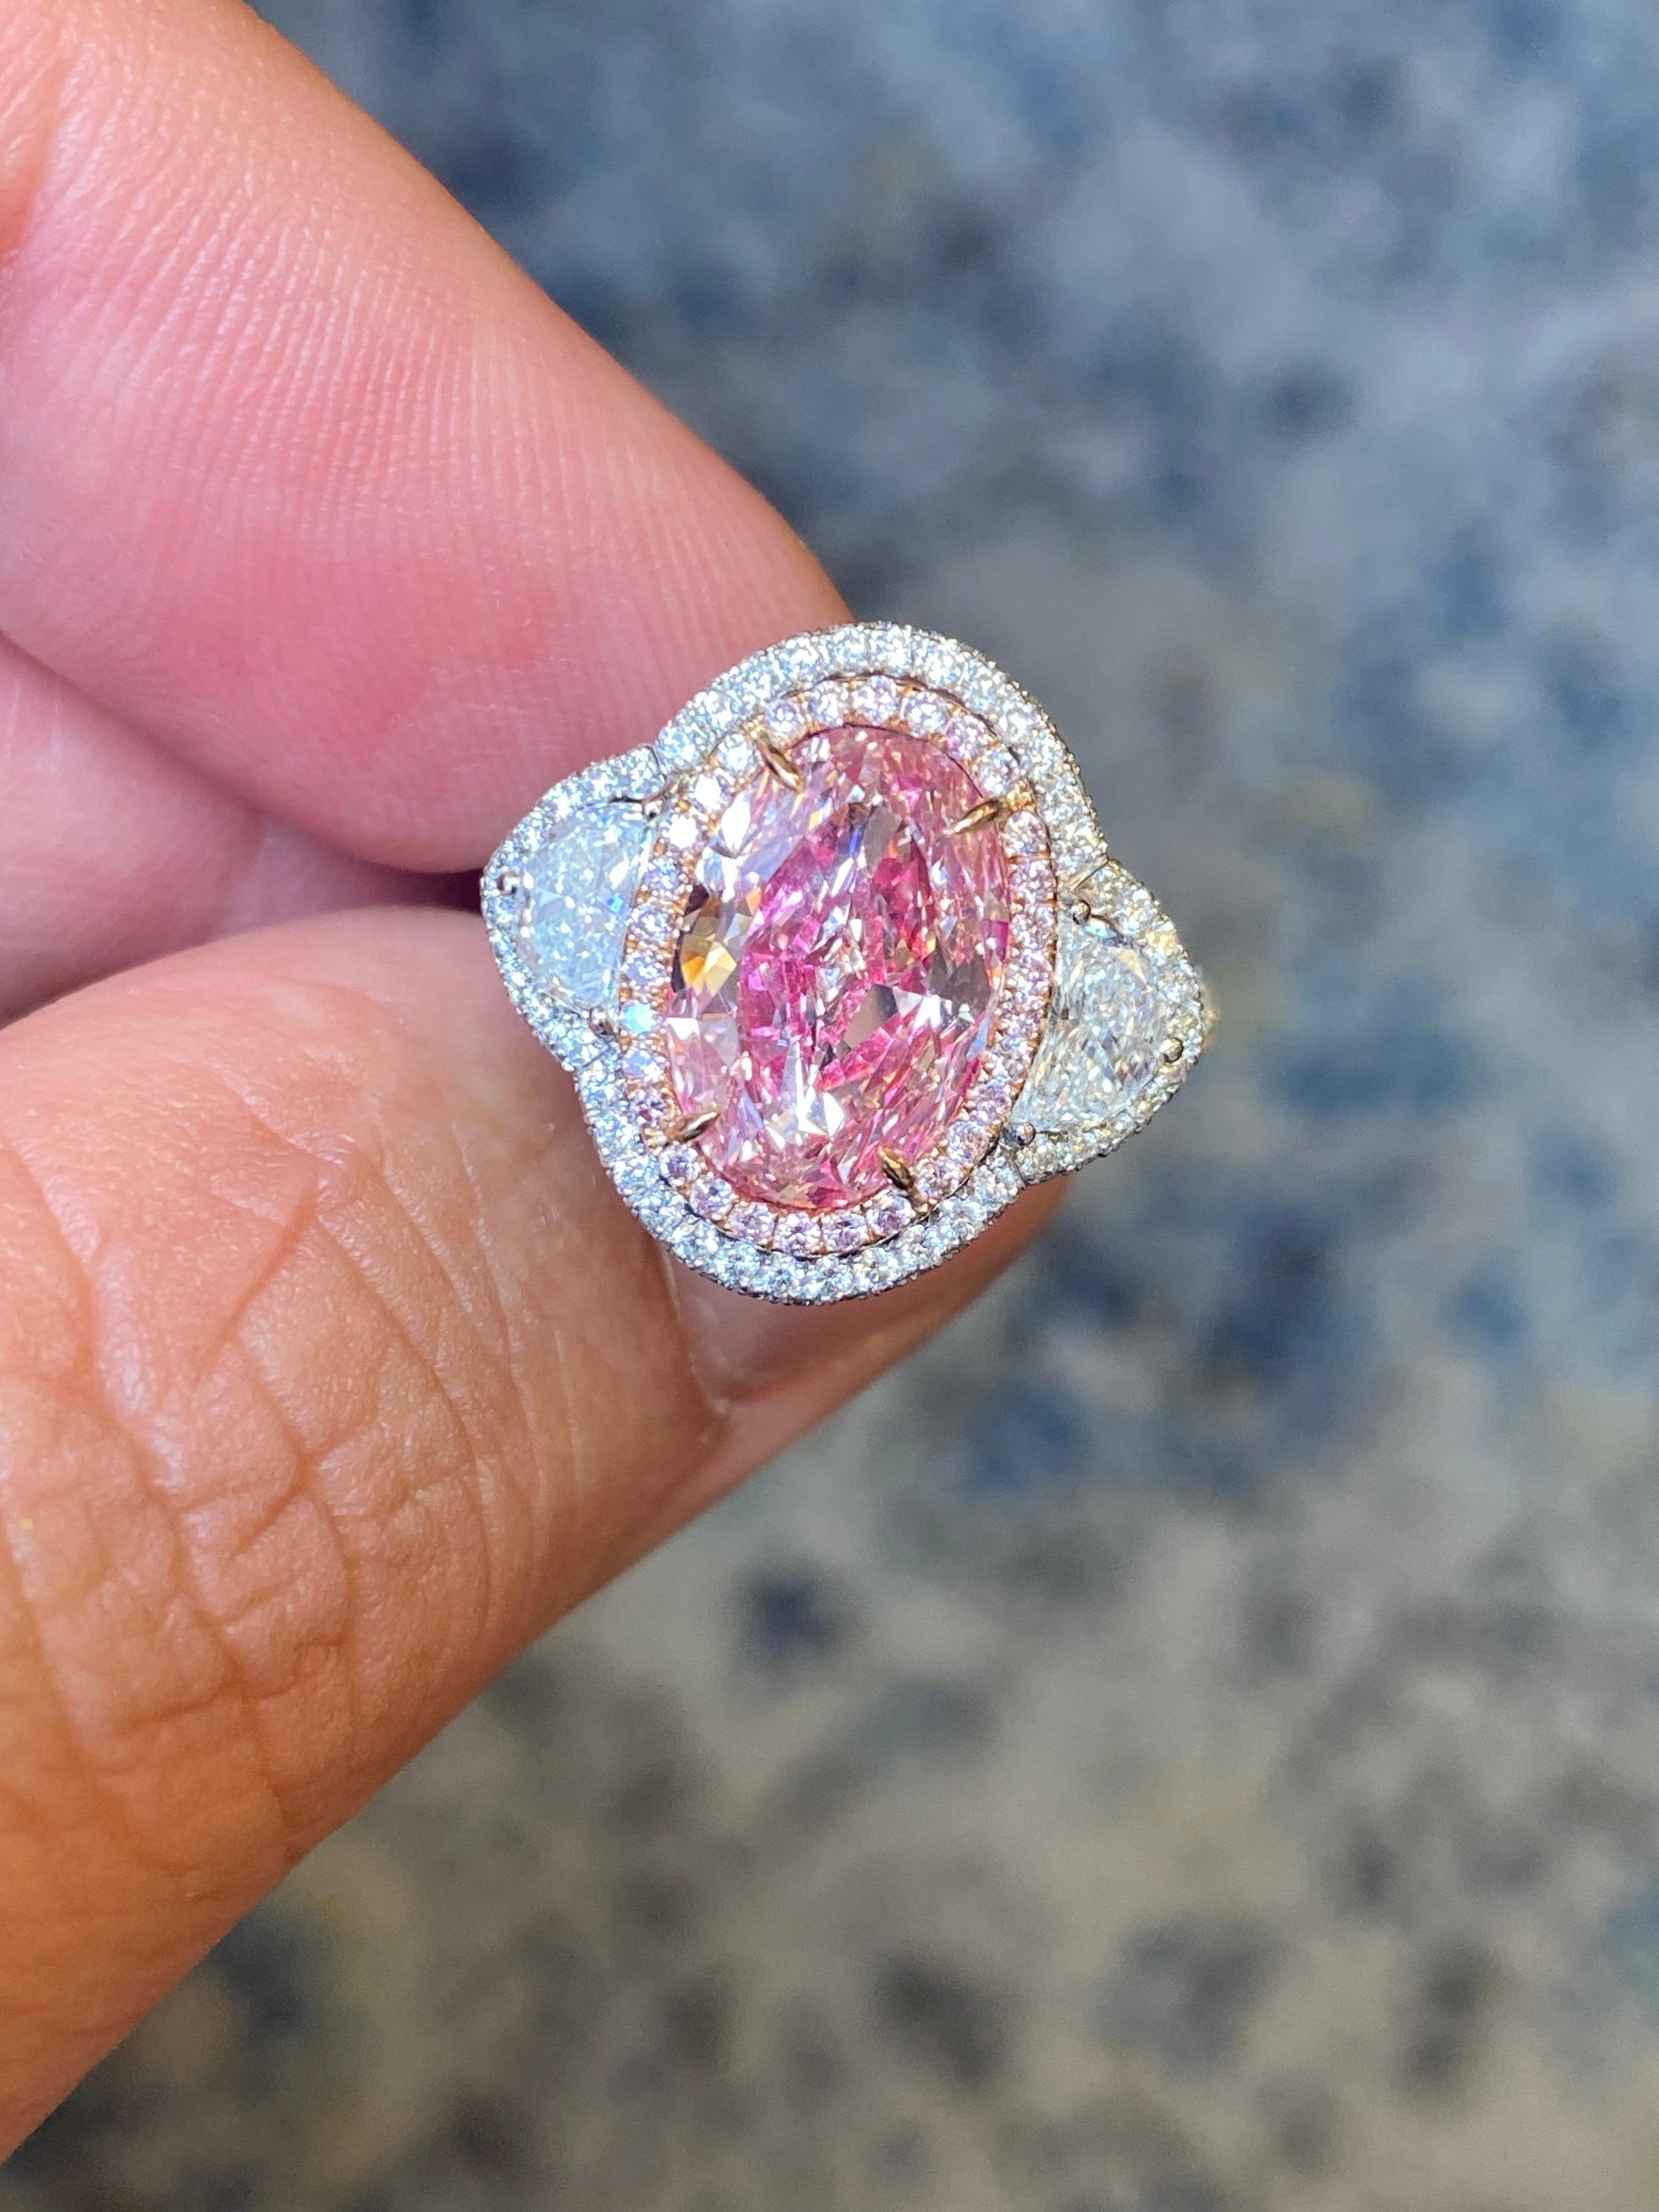 From Emilio Jewelry, a well known and respected wholesaler/dealer located on New York’s iconic Fifth Avenue, 
The focal point of this hand made ring is the excellently layed out Natural Oval Fancy pink diamond weighing just over 3.oo carats. 
We are